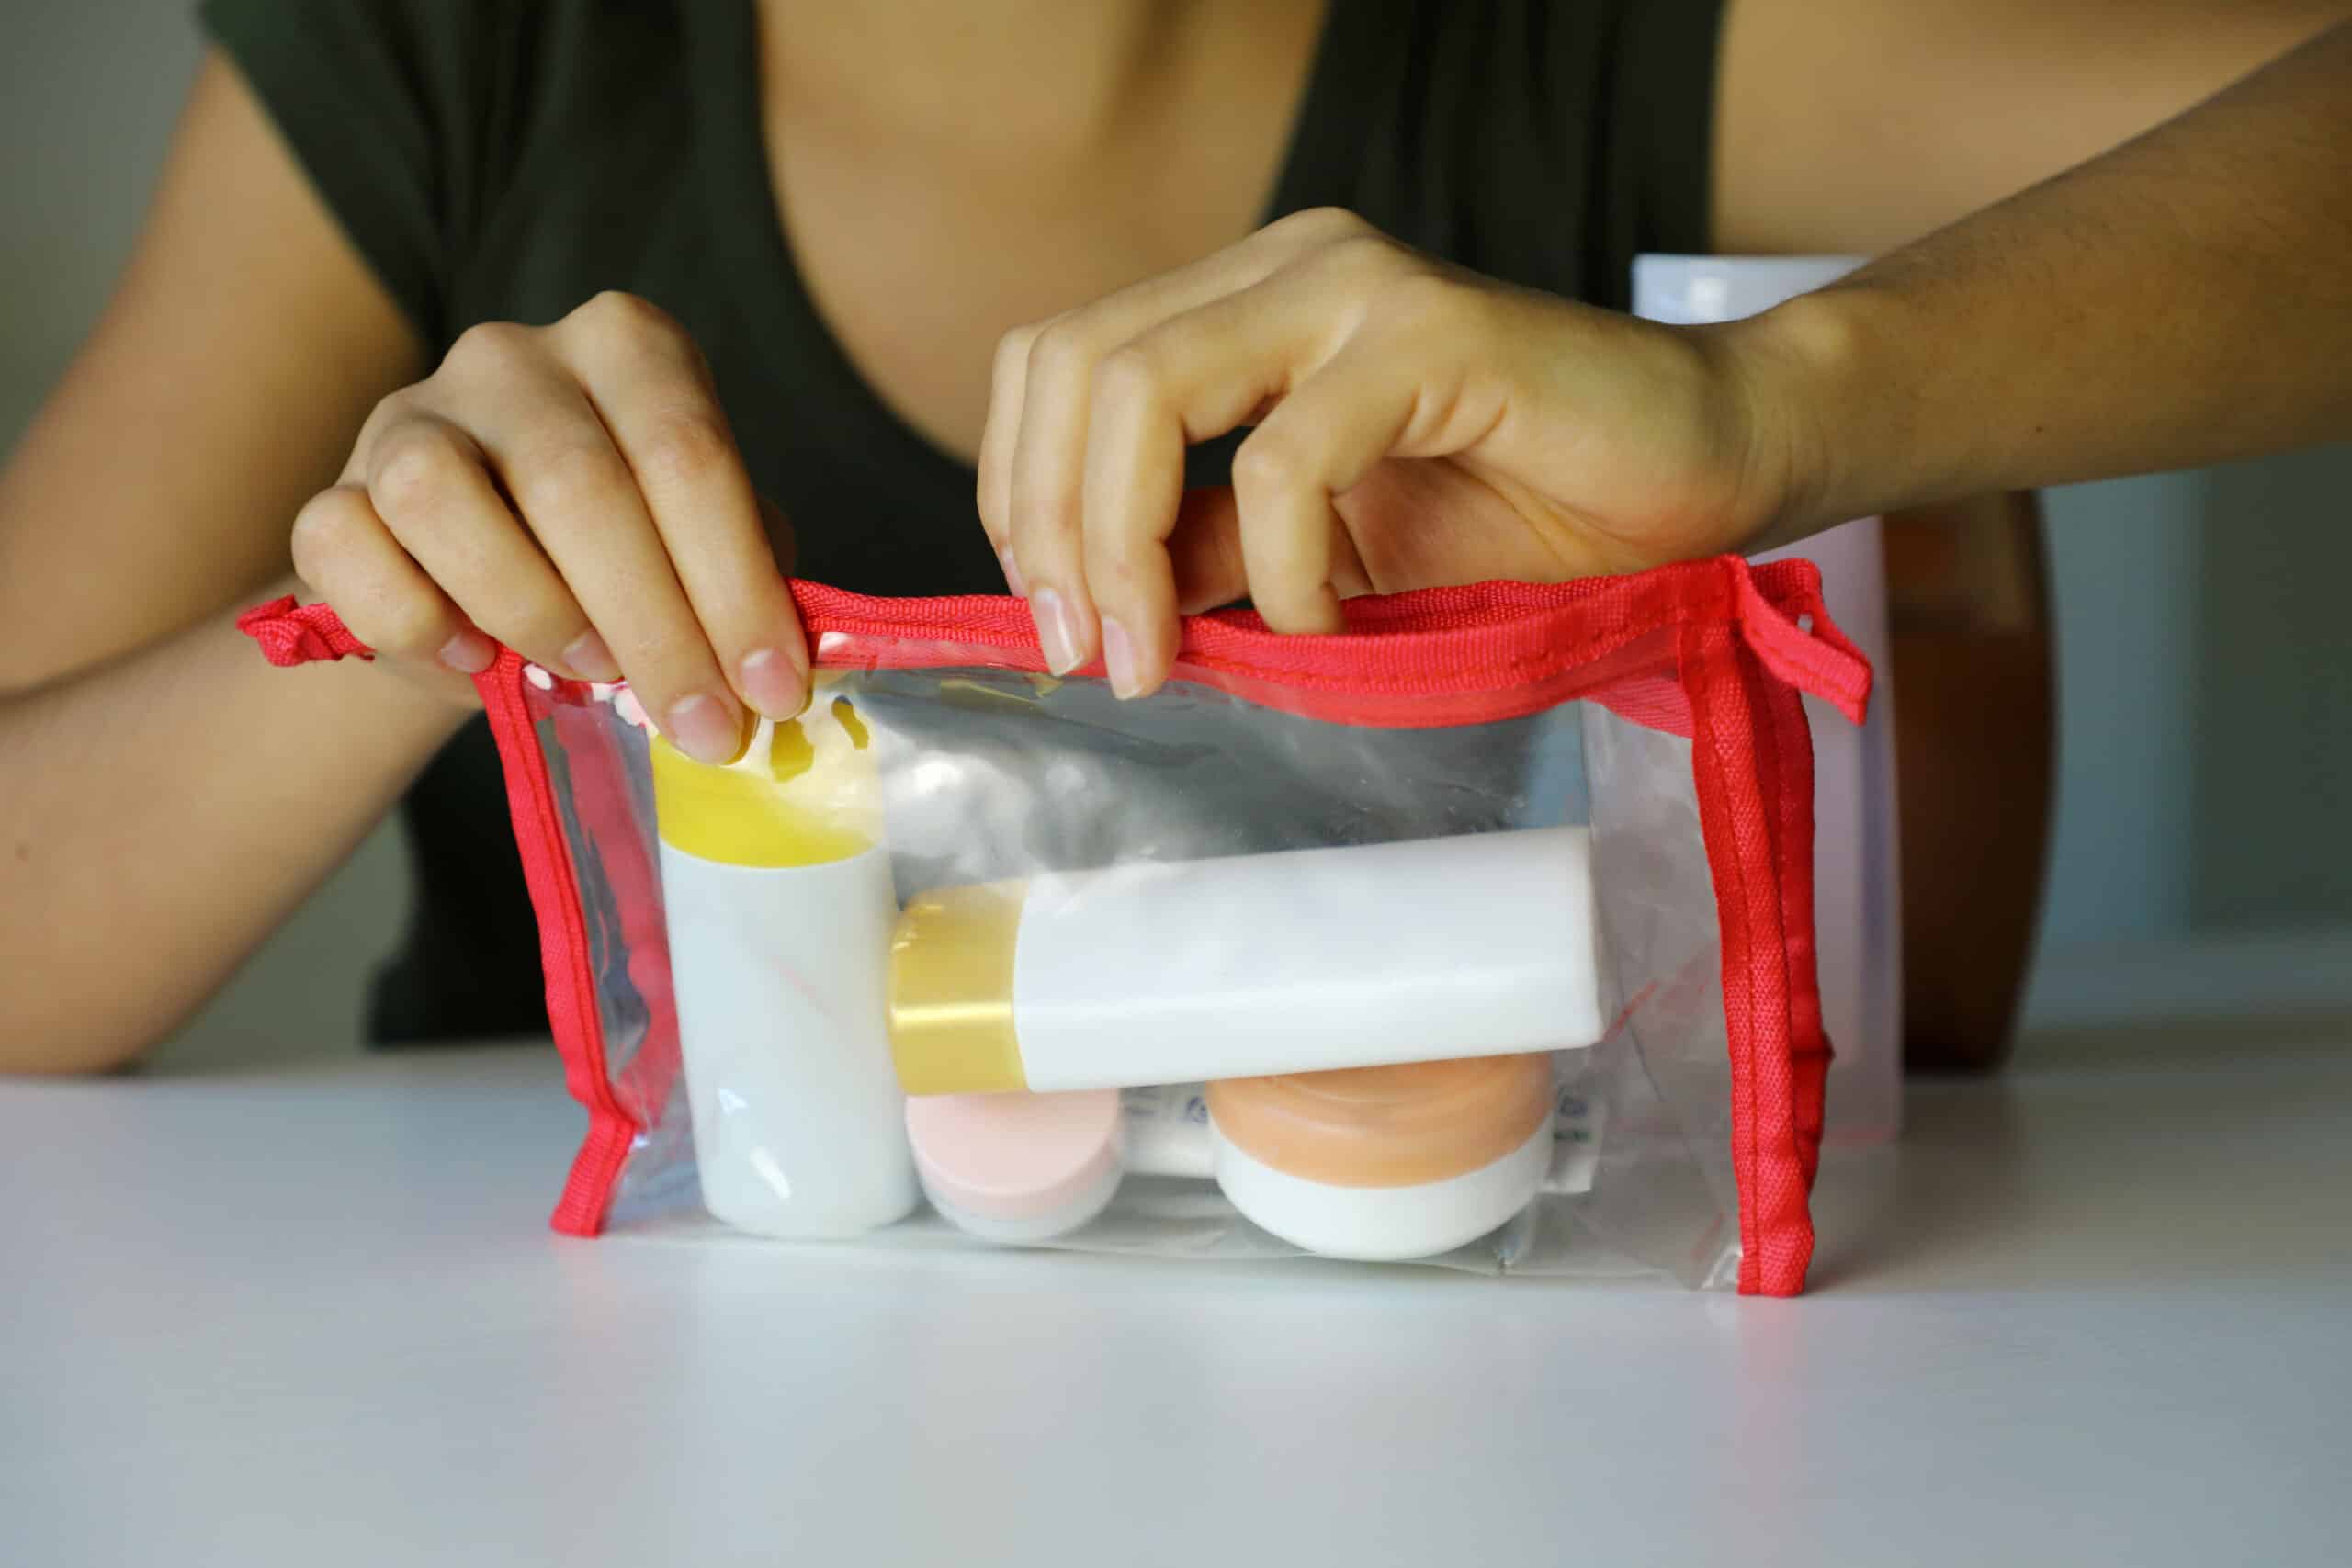 woman filling quart-sized bag with toiletries